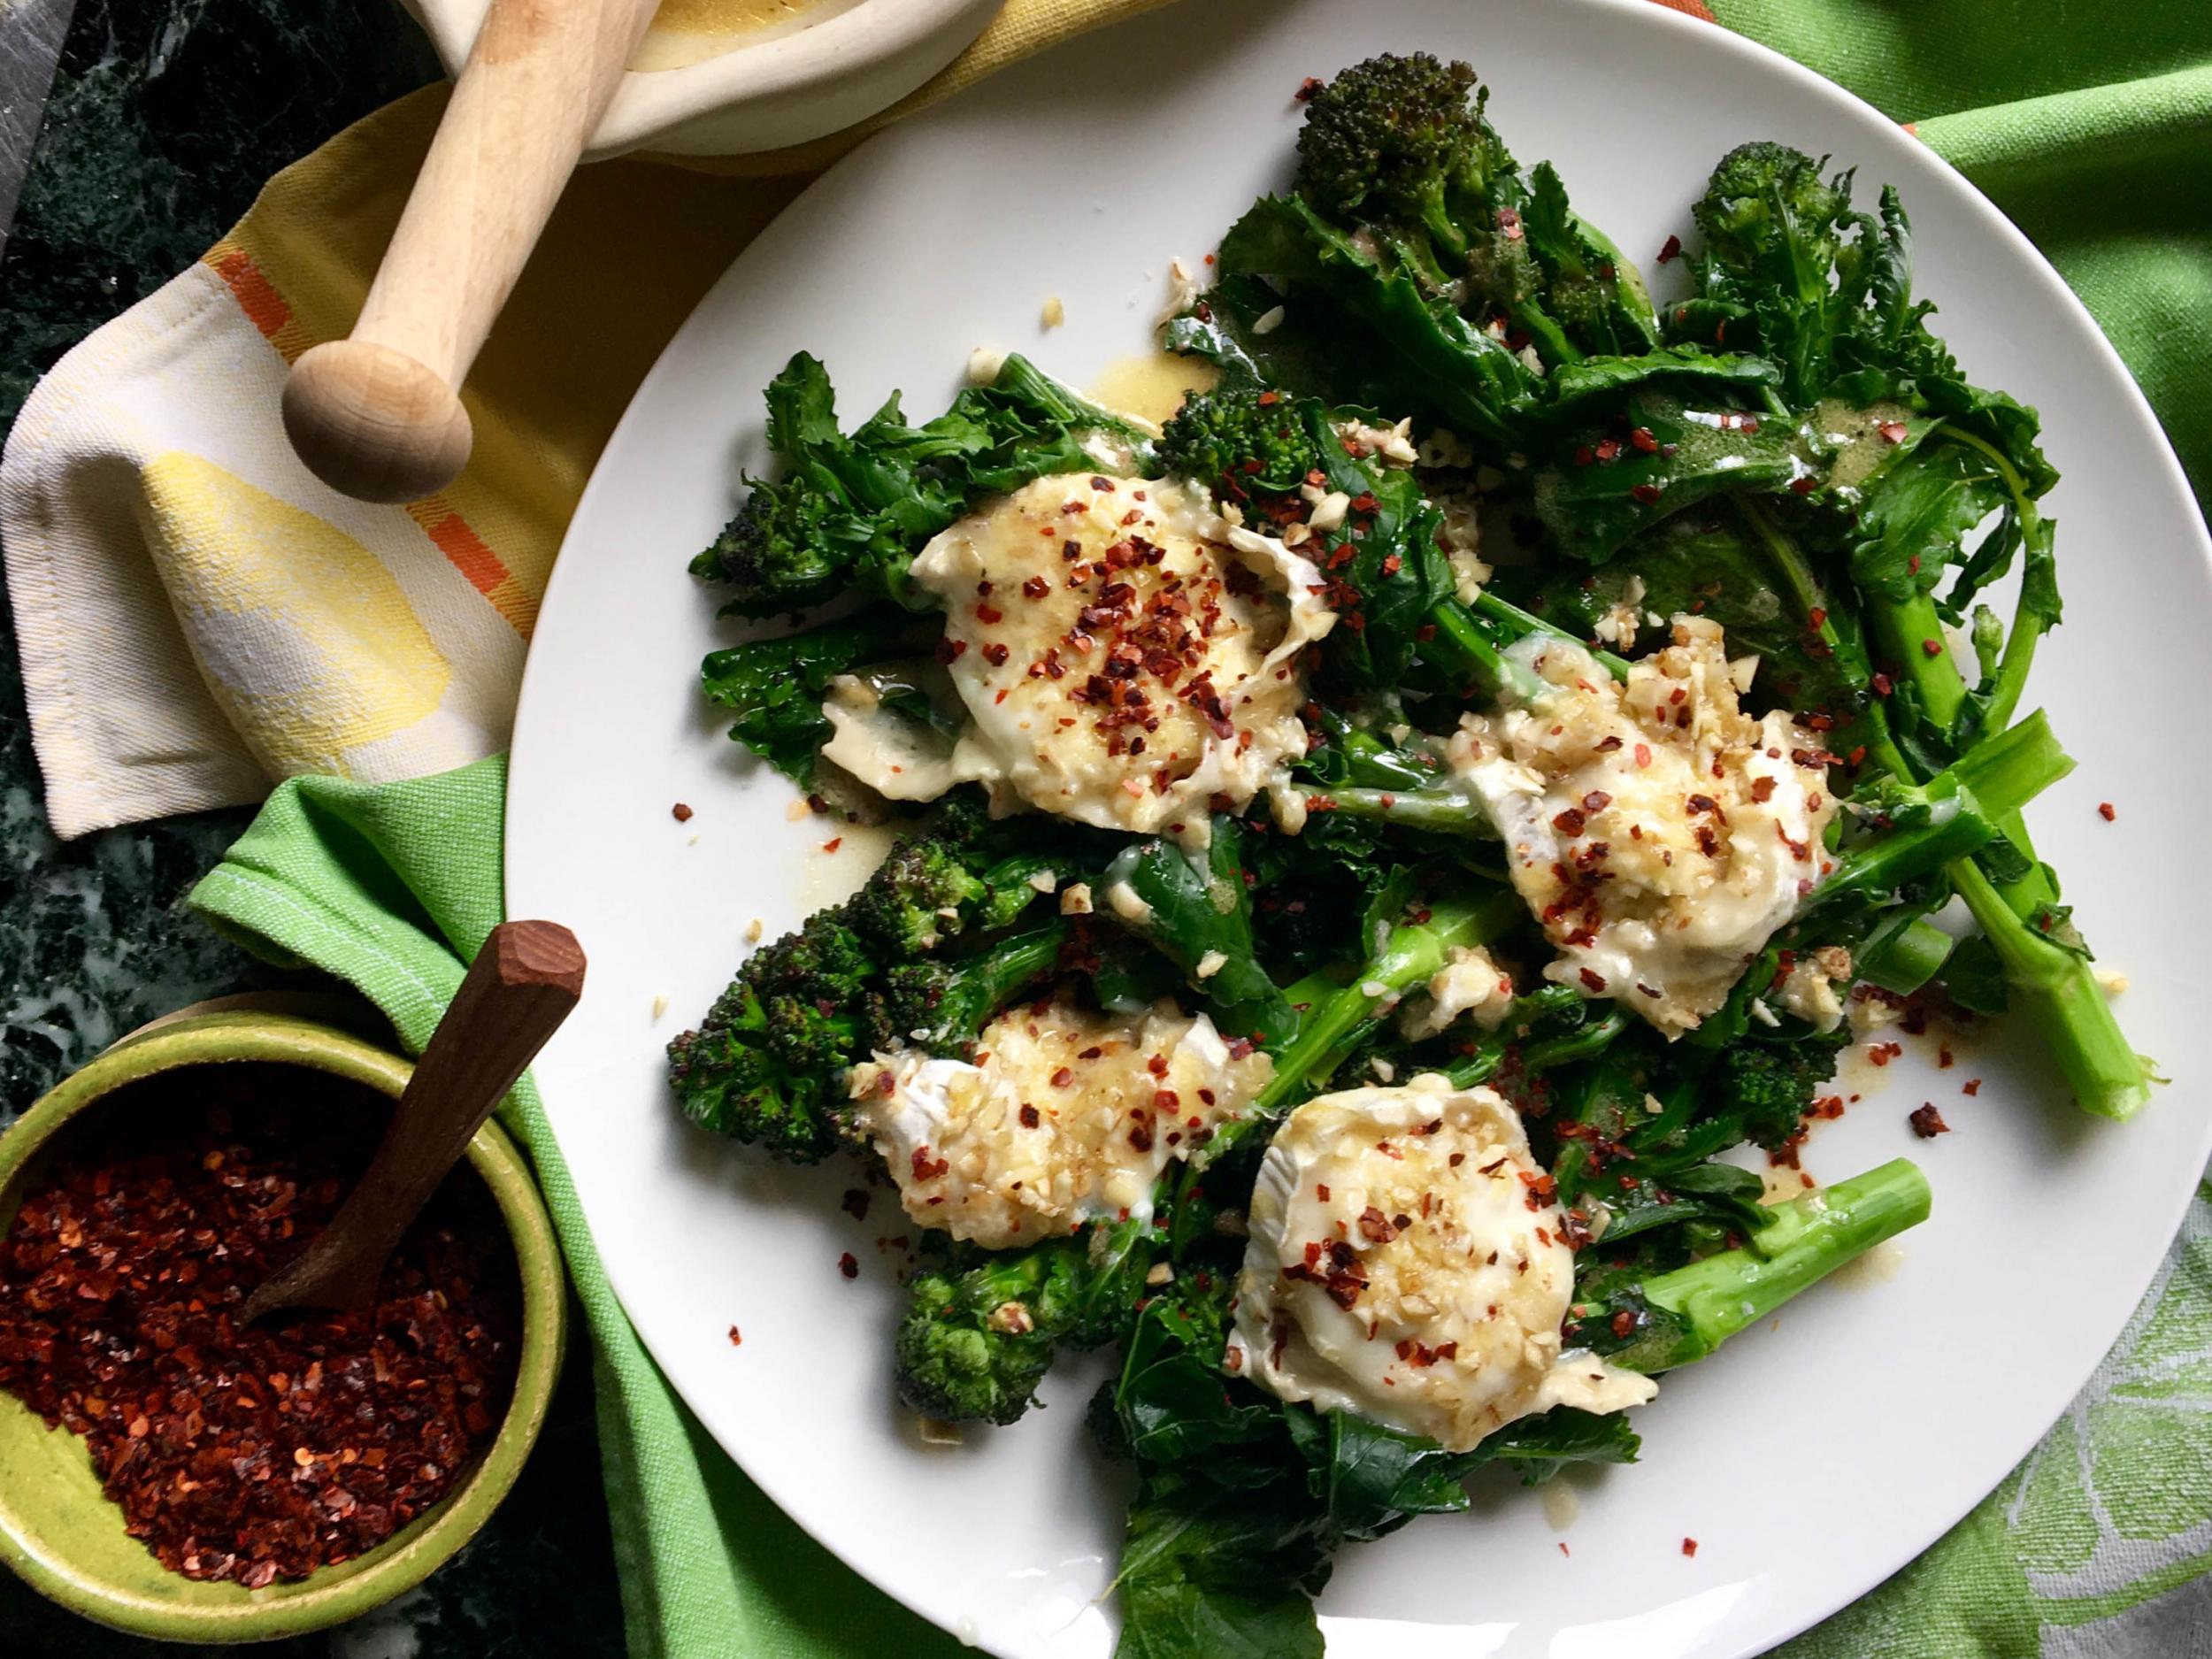 Use the nuts to make a crust for goat’s cheese and combine it with purple sprouting broccoli for a delicious main course